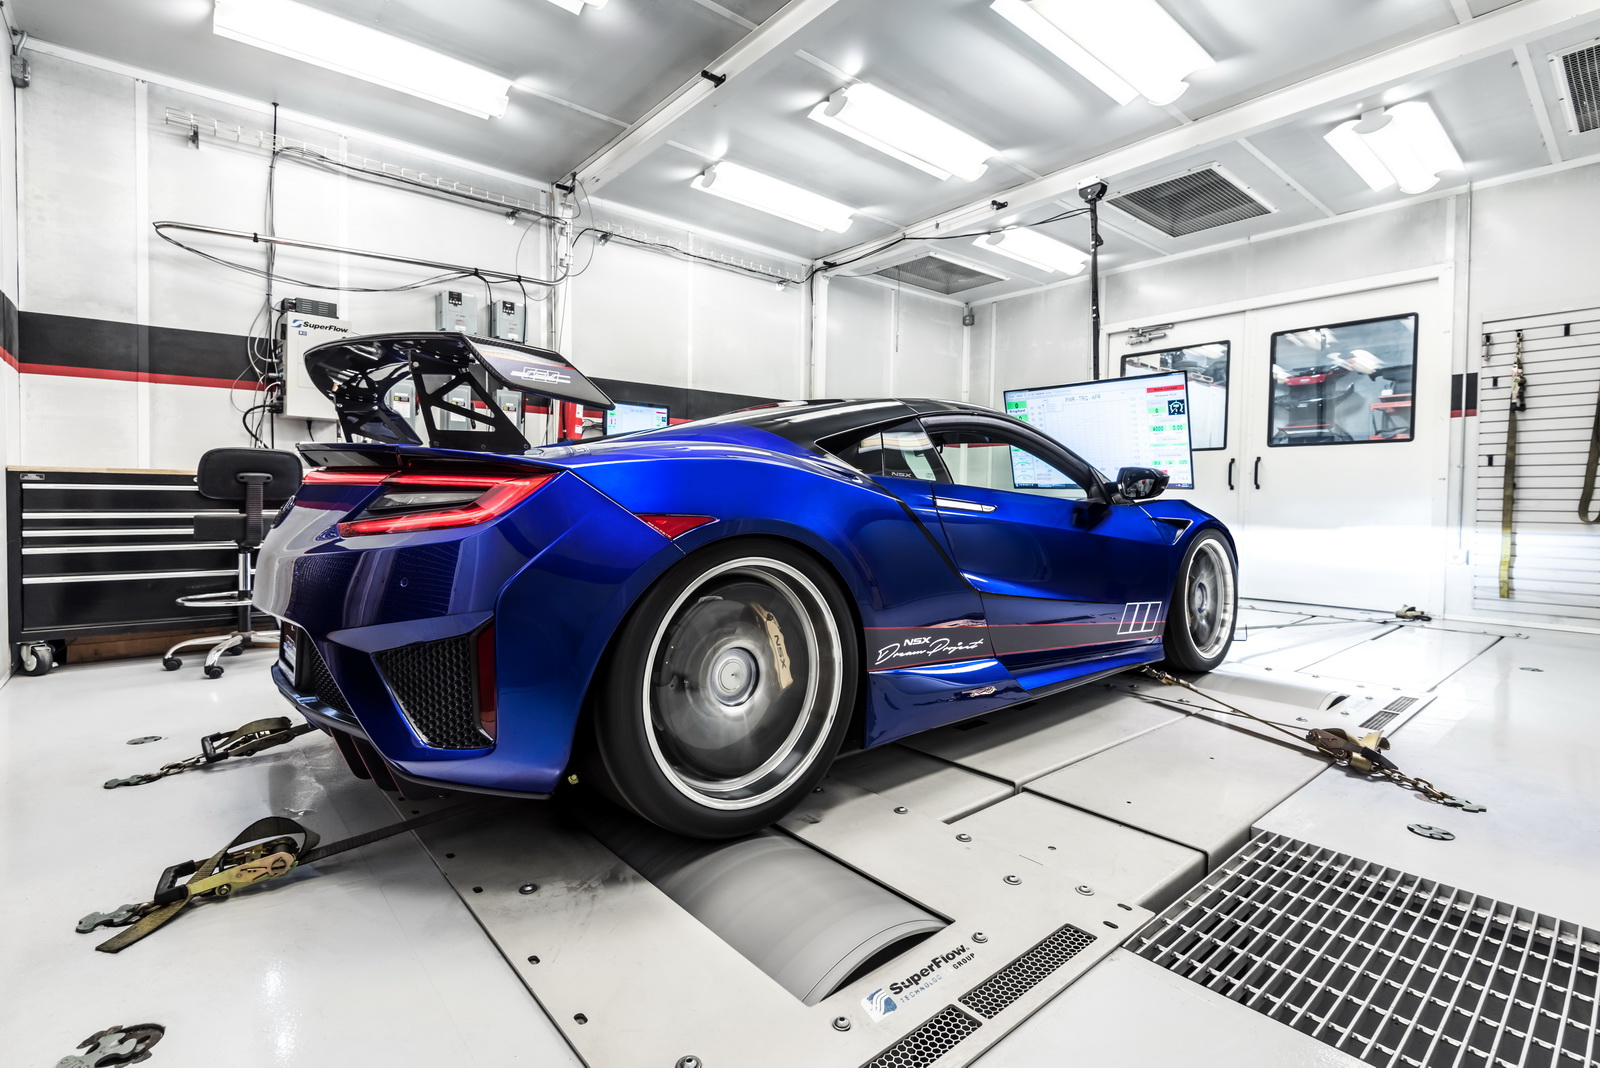 Debuting at SEMA, the second generation Acura NSX “Dream Project,” created by acclaimed NSX specialist, ScienceofSpeed, features subtle enhancements to the supercar’s powertrain, suspension and styling to elevate performance.